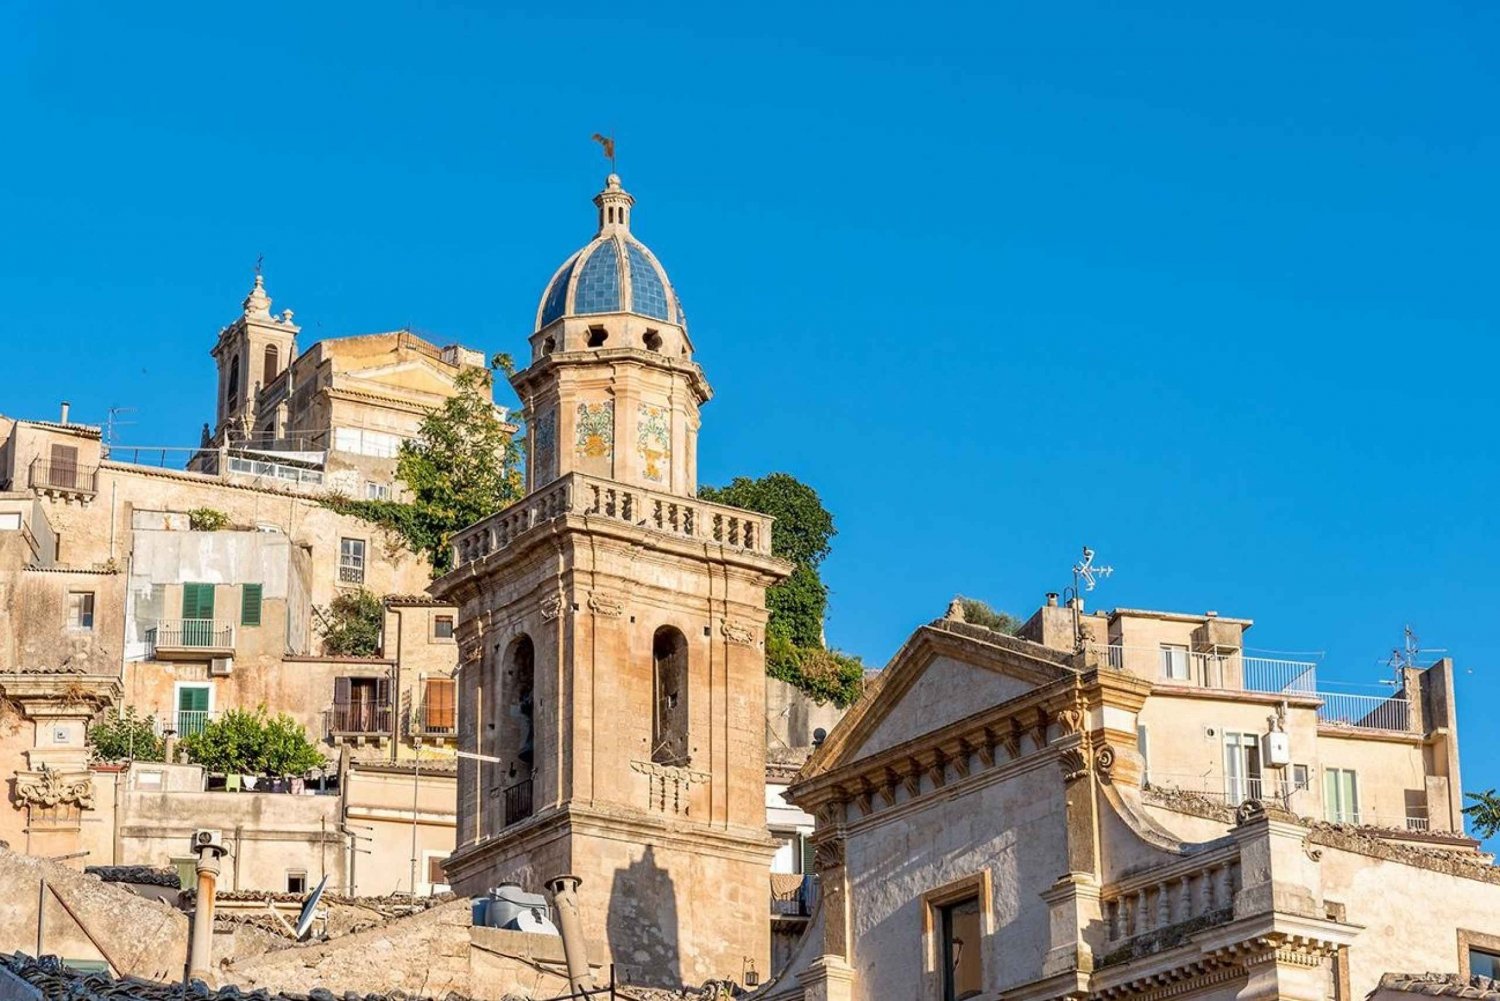 Ragusa Ibla: photographs from the past